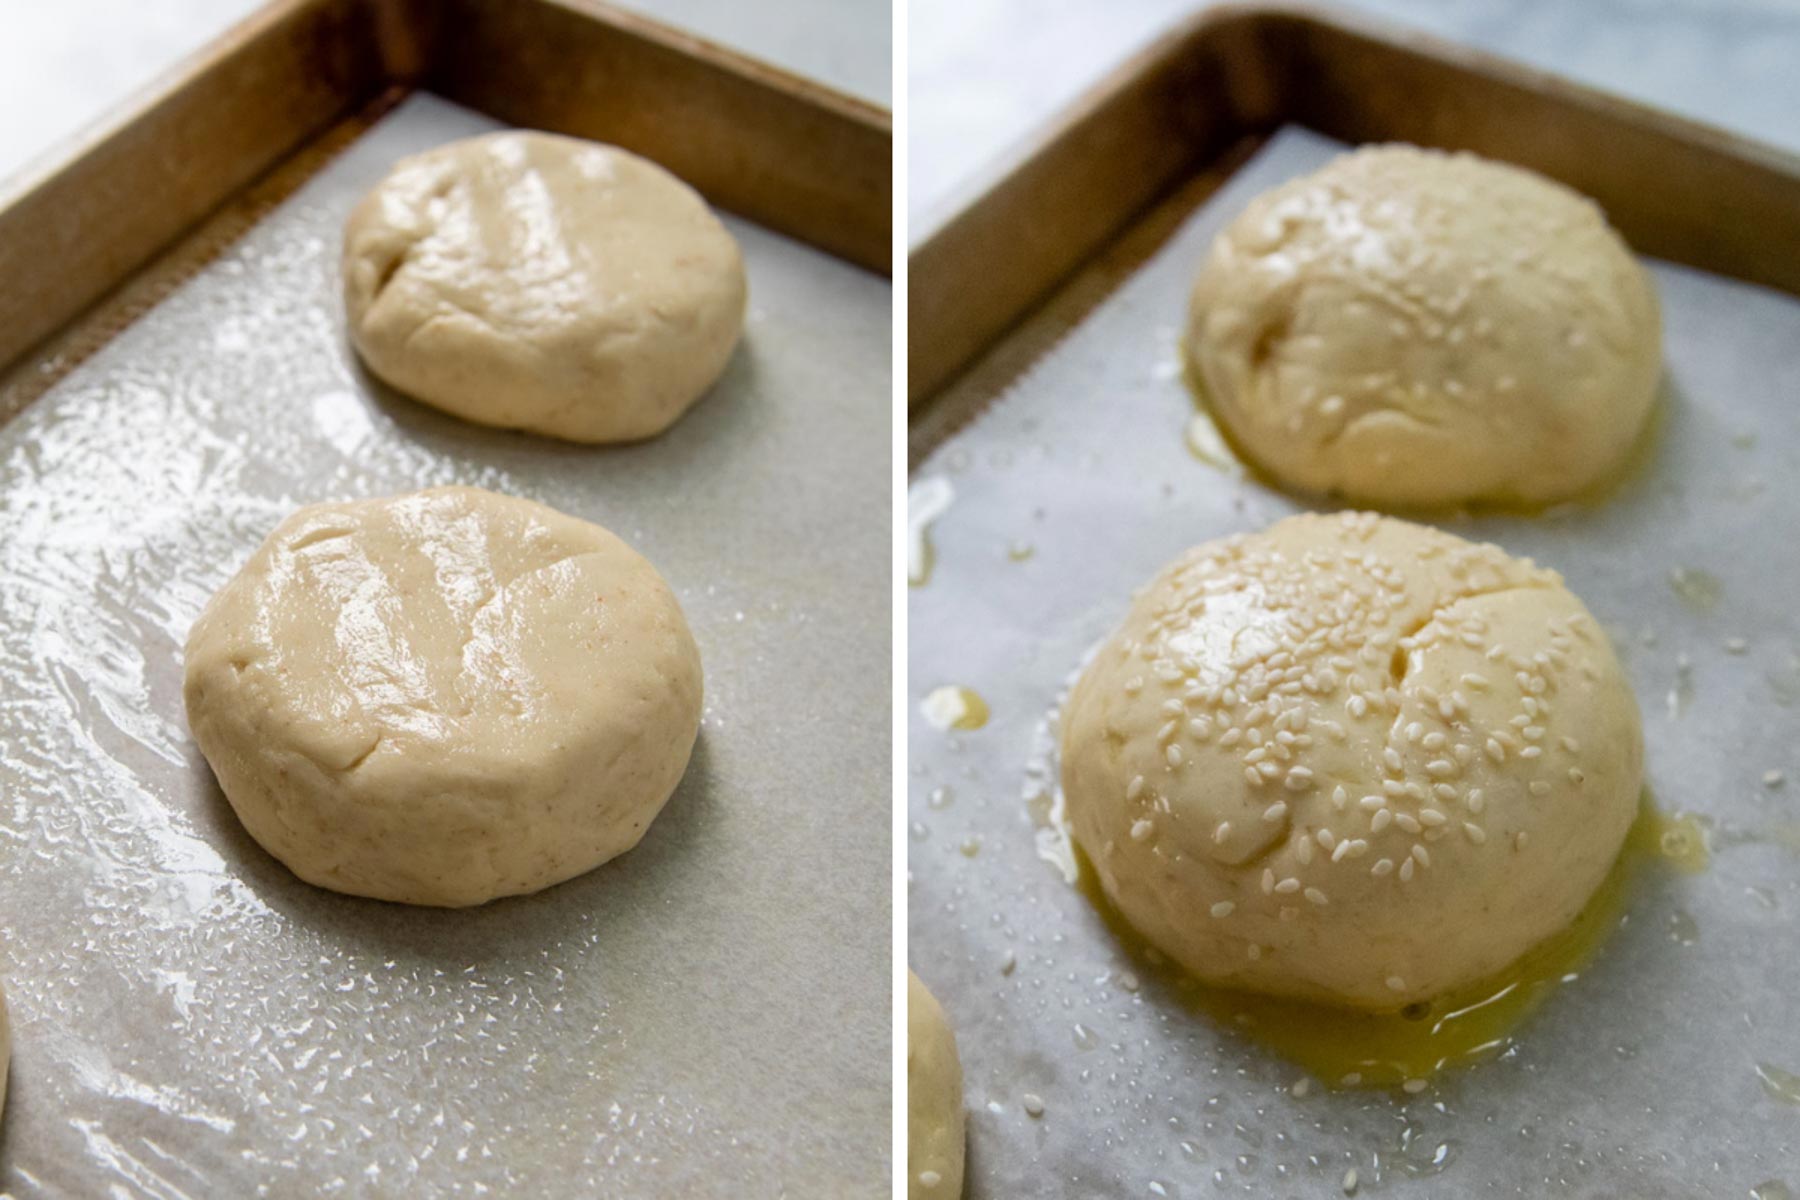 images showing how to shape the dough before baking.